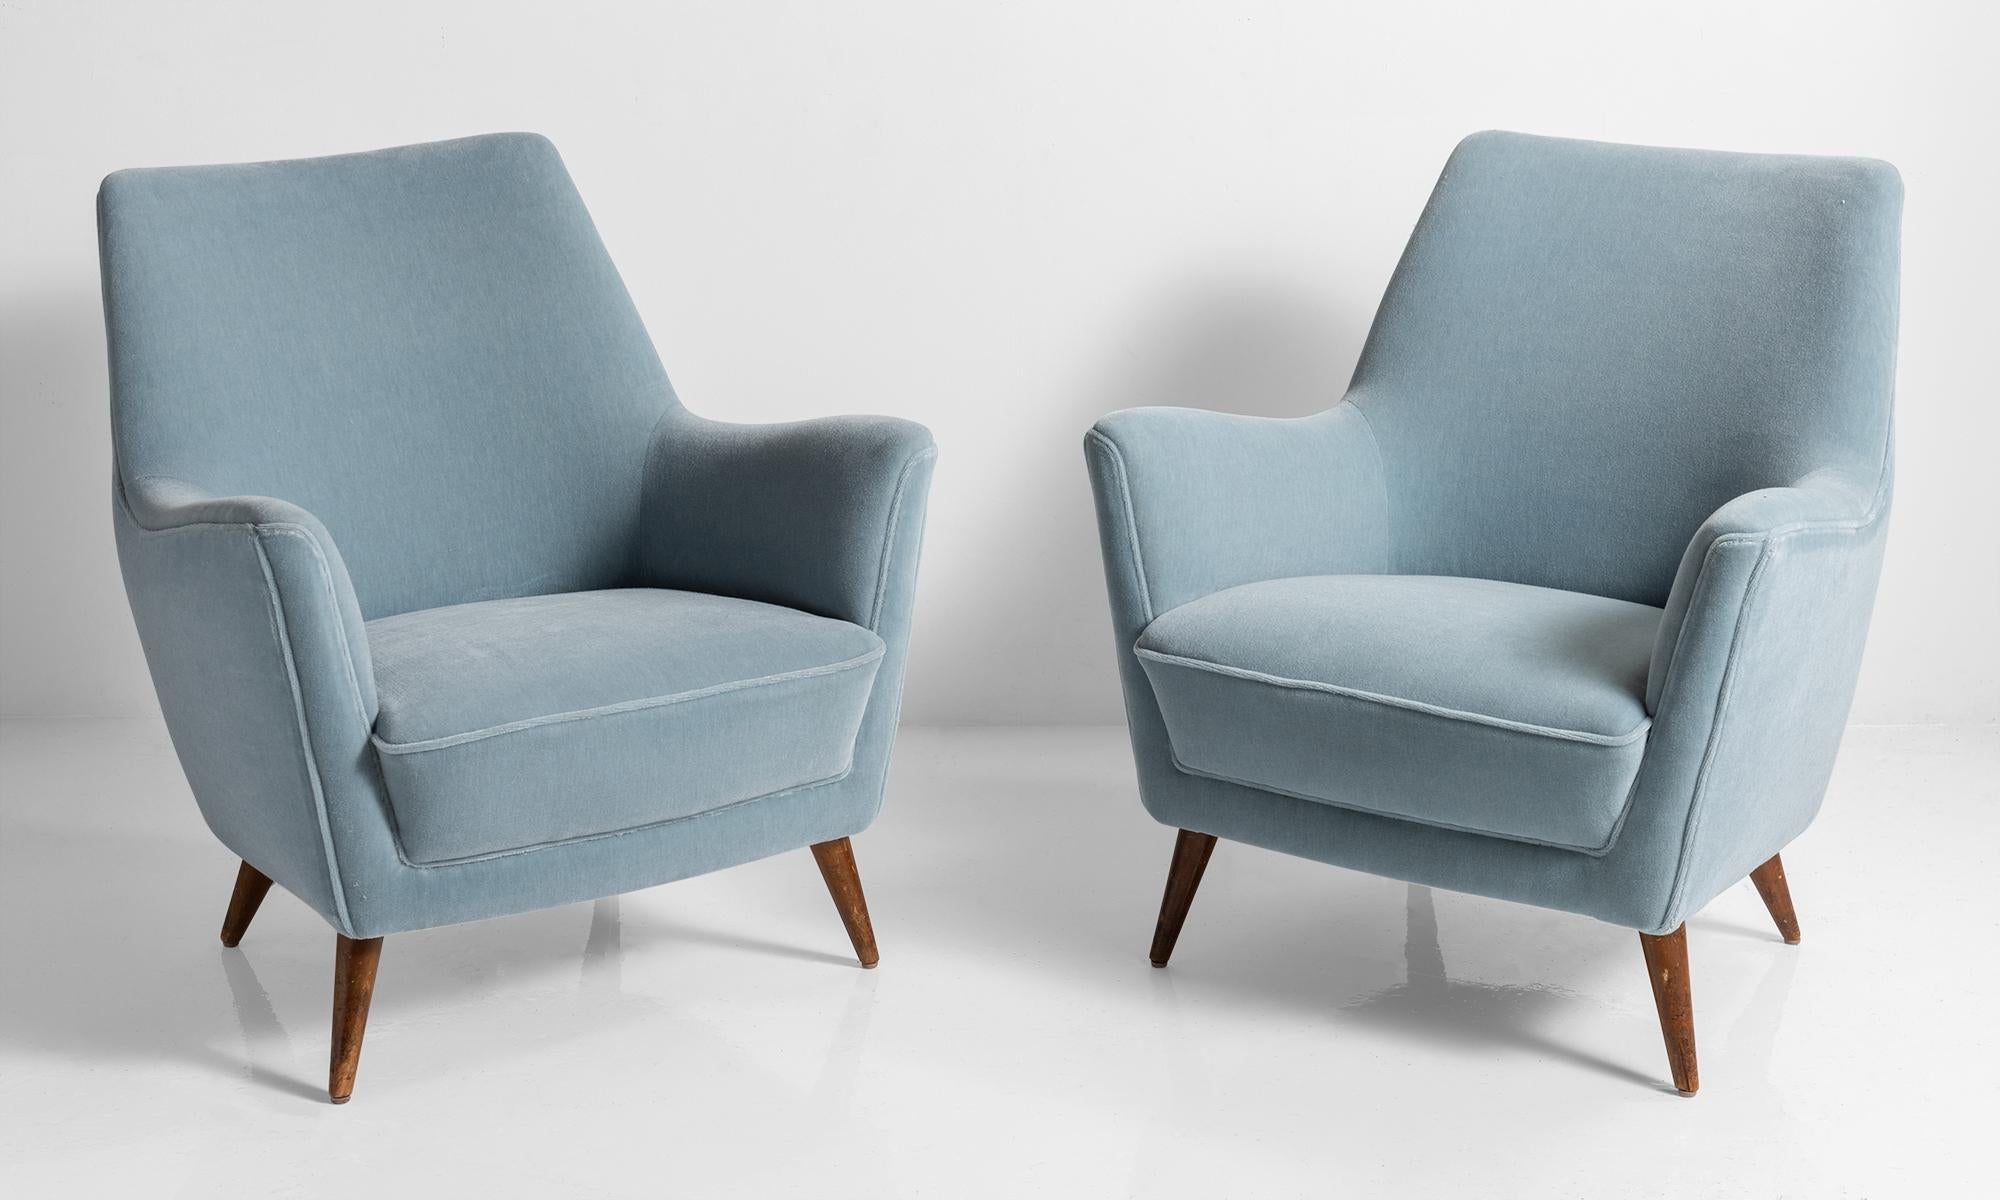 Blue mohair armchairs, Italy, circa 1960.

Newly upholstered in blue mohair, on original legs.